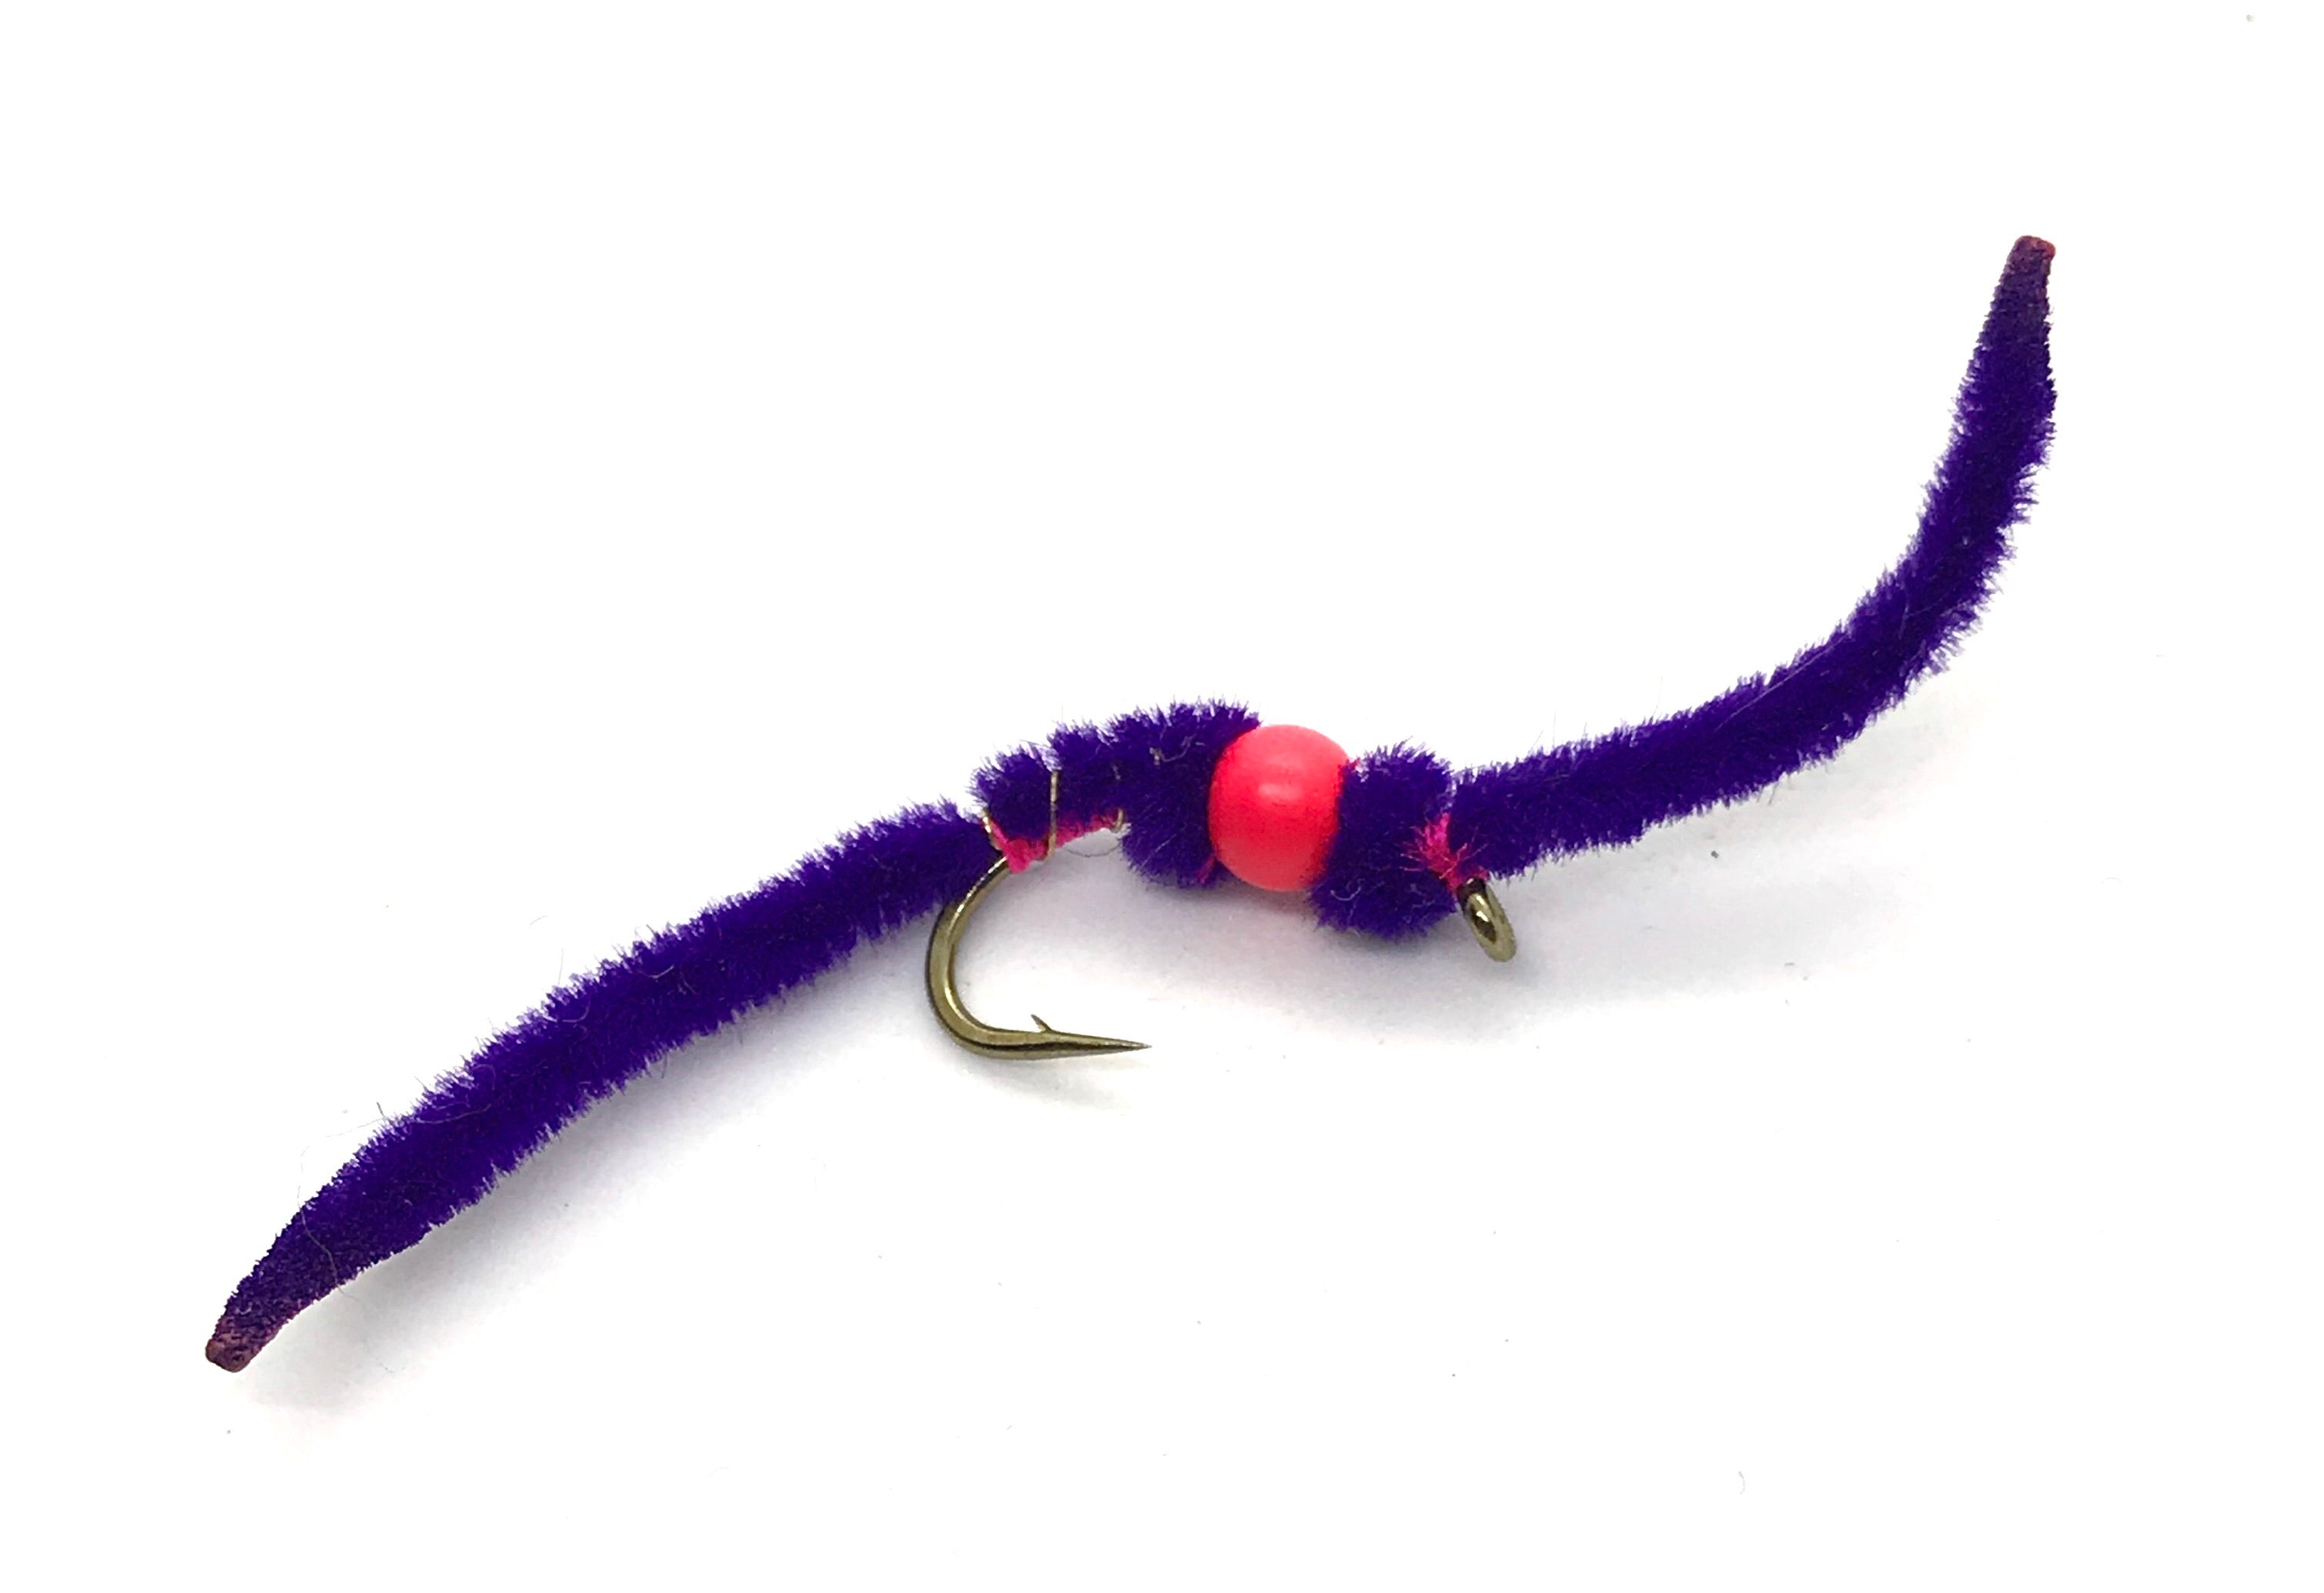 TB Chenille Worm (all colors)